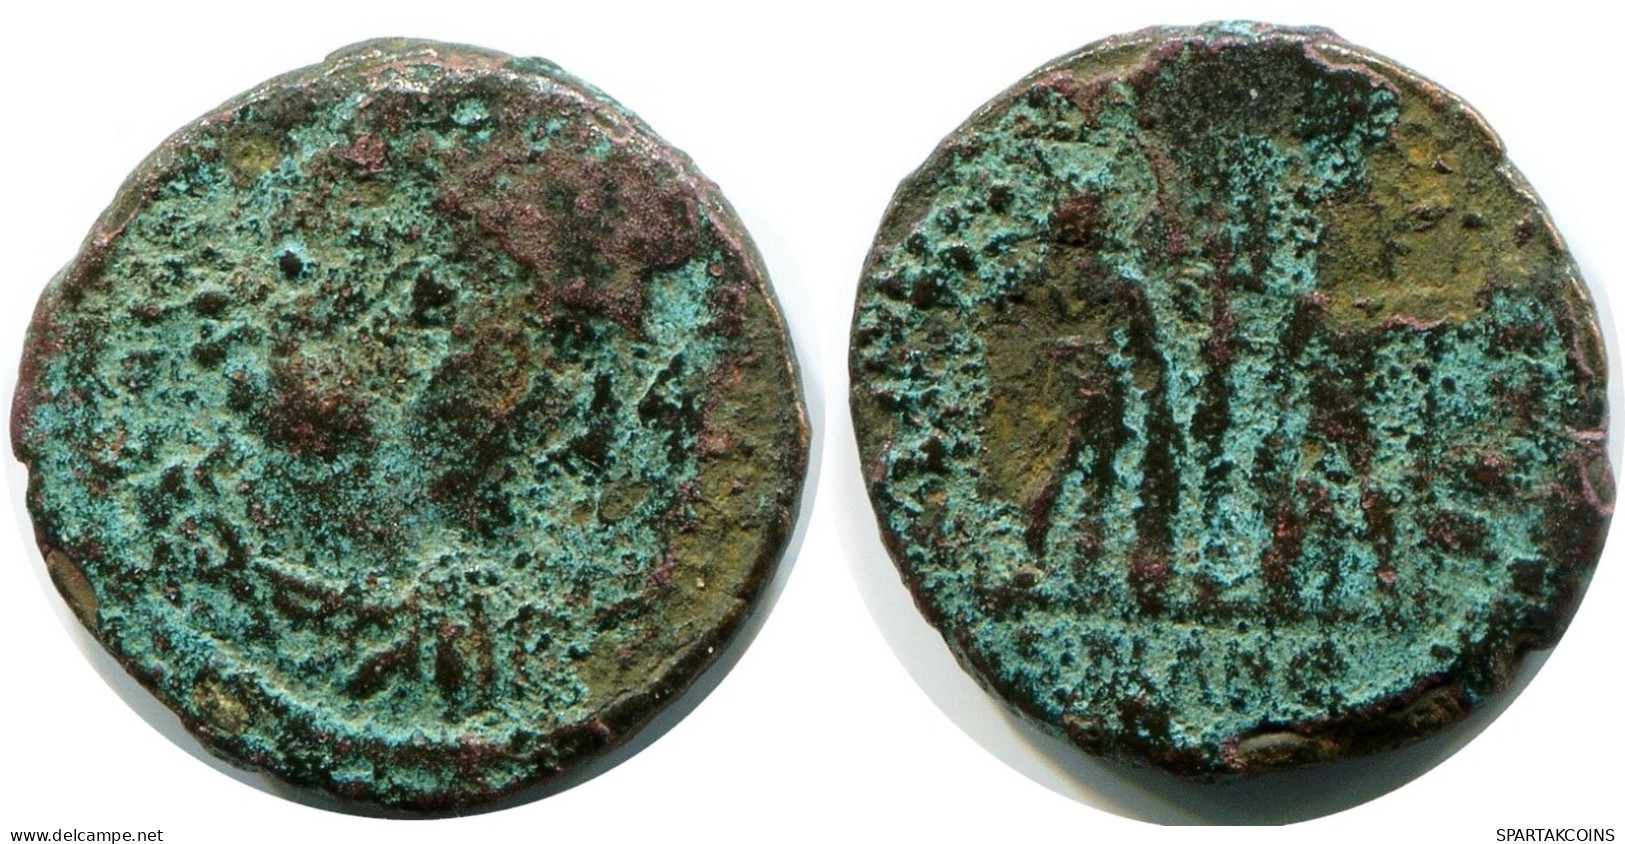 ROMAN Moneda MINTED IN ANTIOCH FOUND IN IHNASYAH HOARD EGYPT #ANC11274.14.E.A - El Impero Christiano (307 / 363)